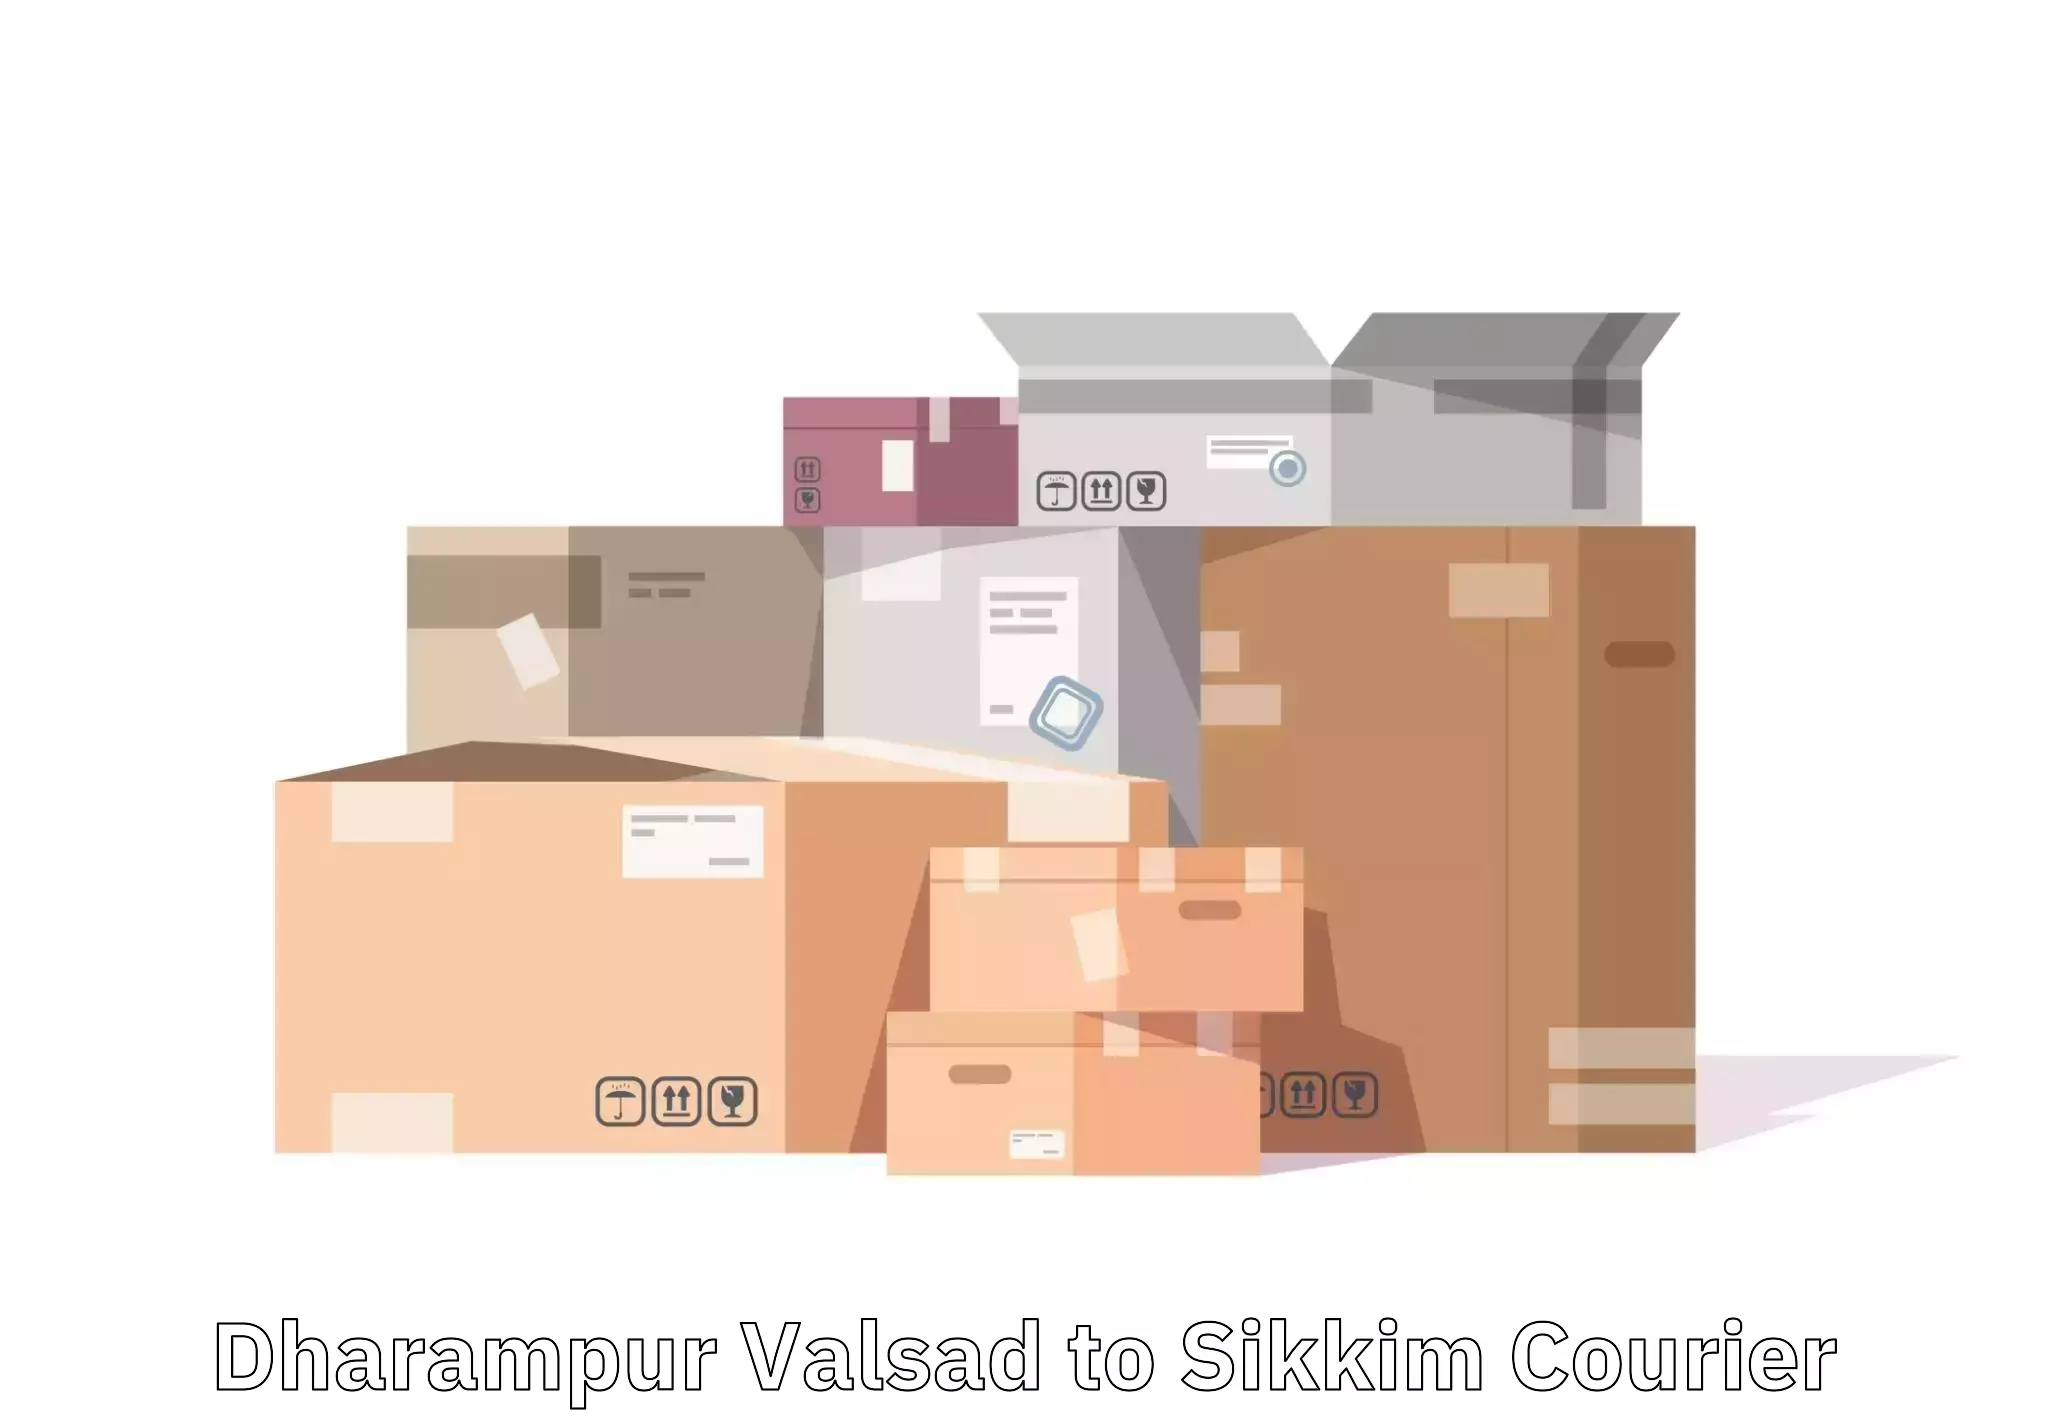 Luggage shipping guide Dharampur Valsad to Gangtok